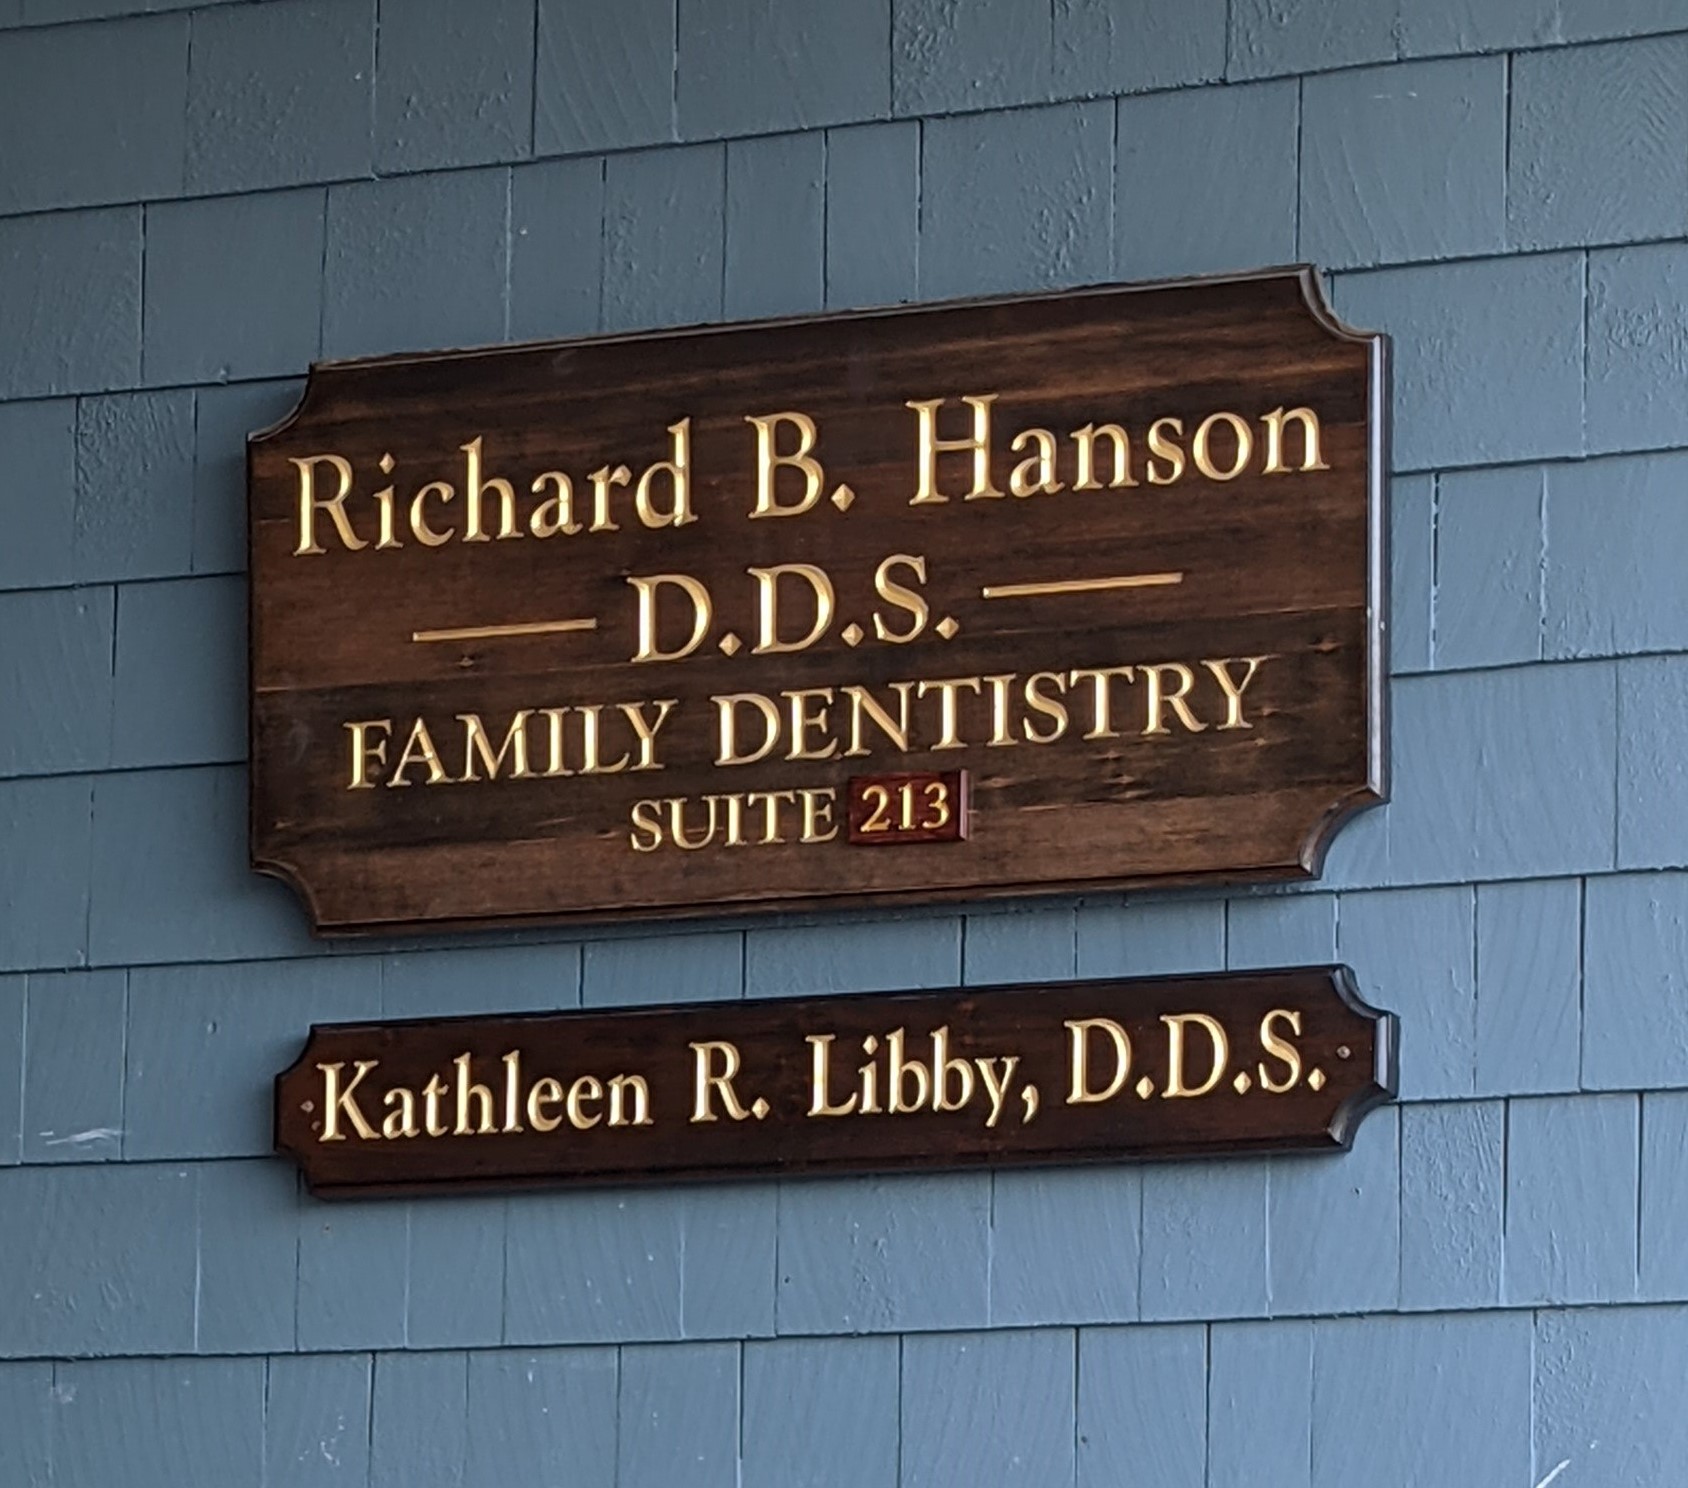 Welcome Kathleen R. Libby D.D.S